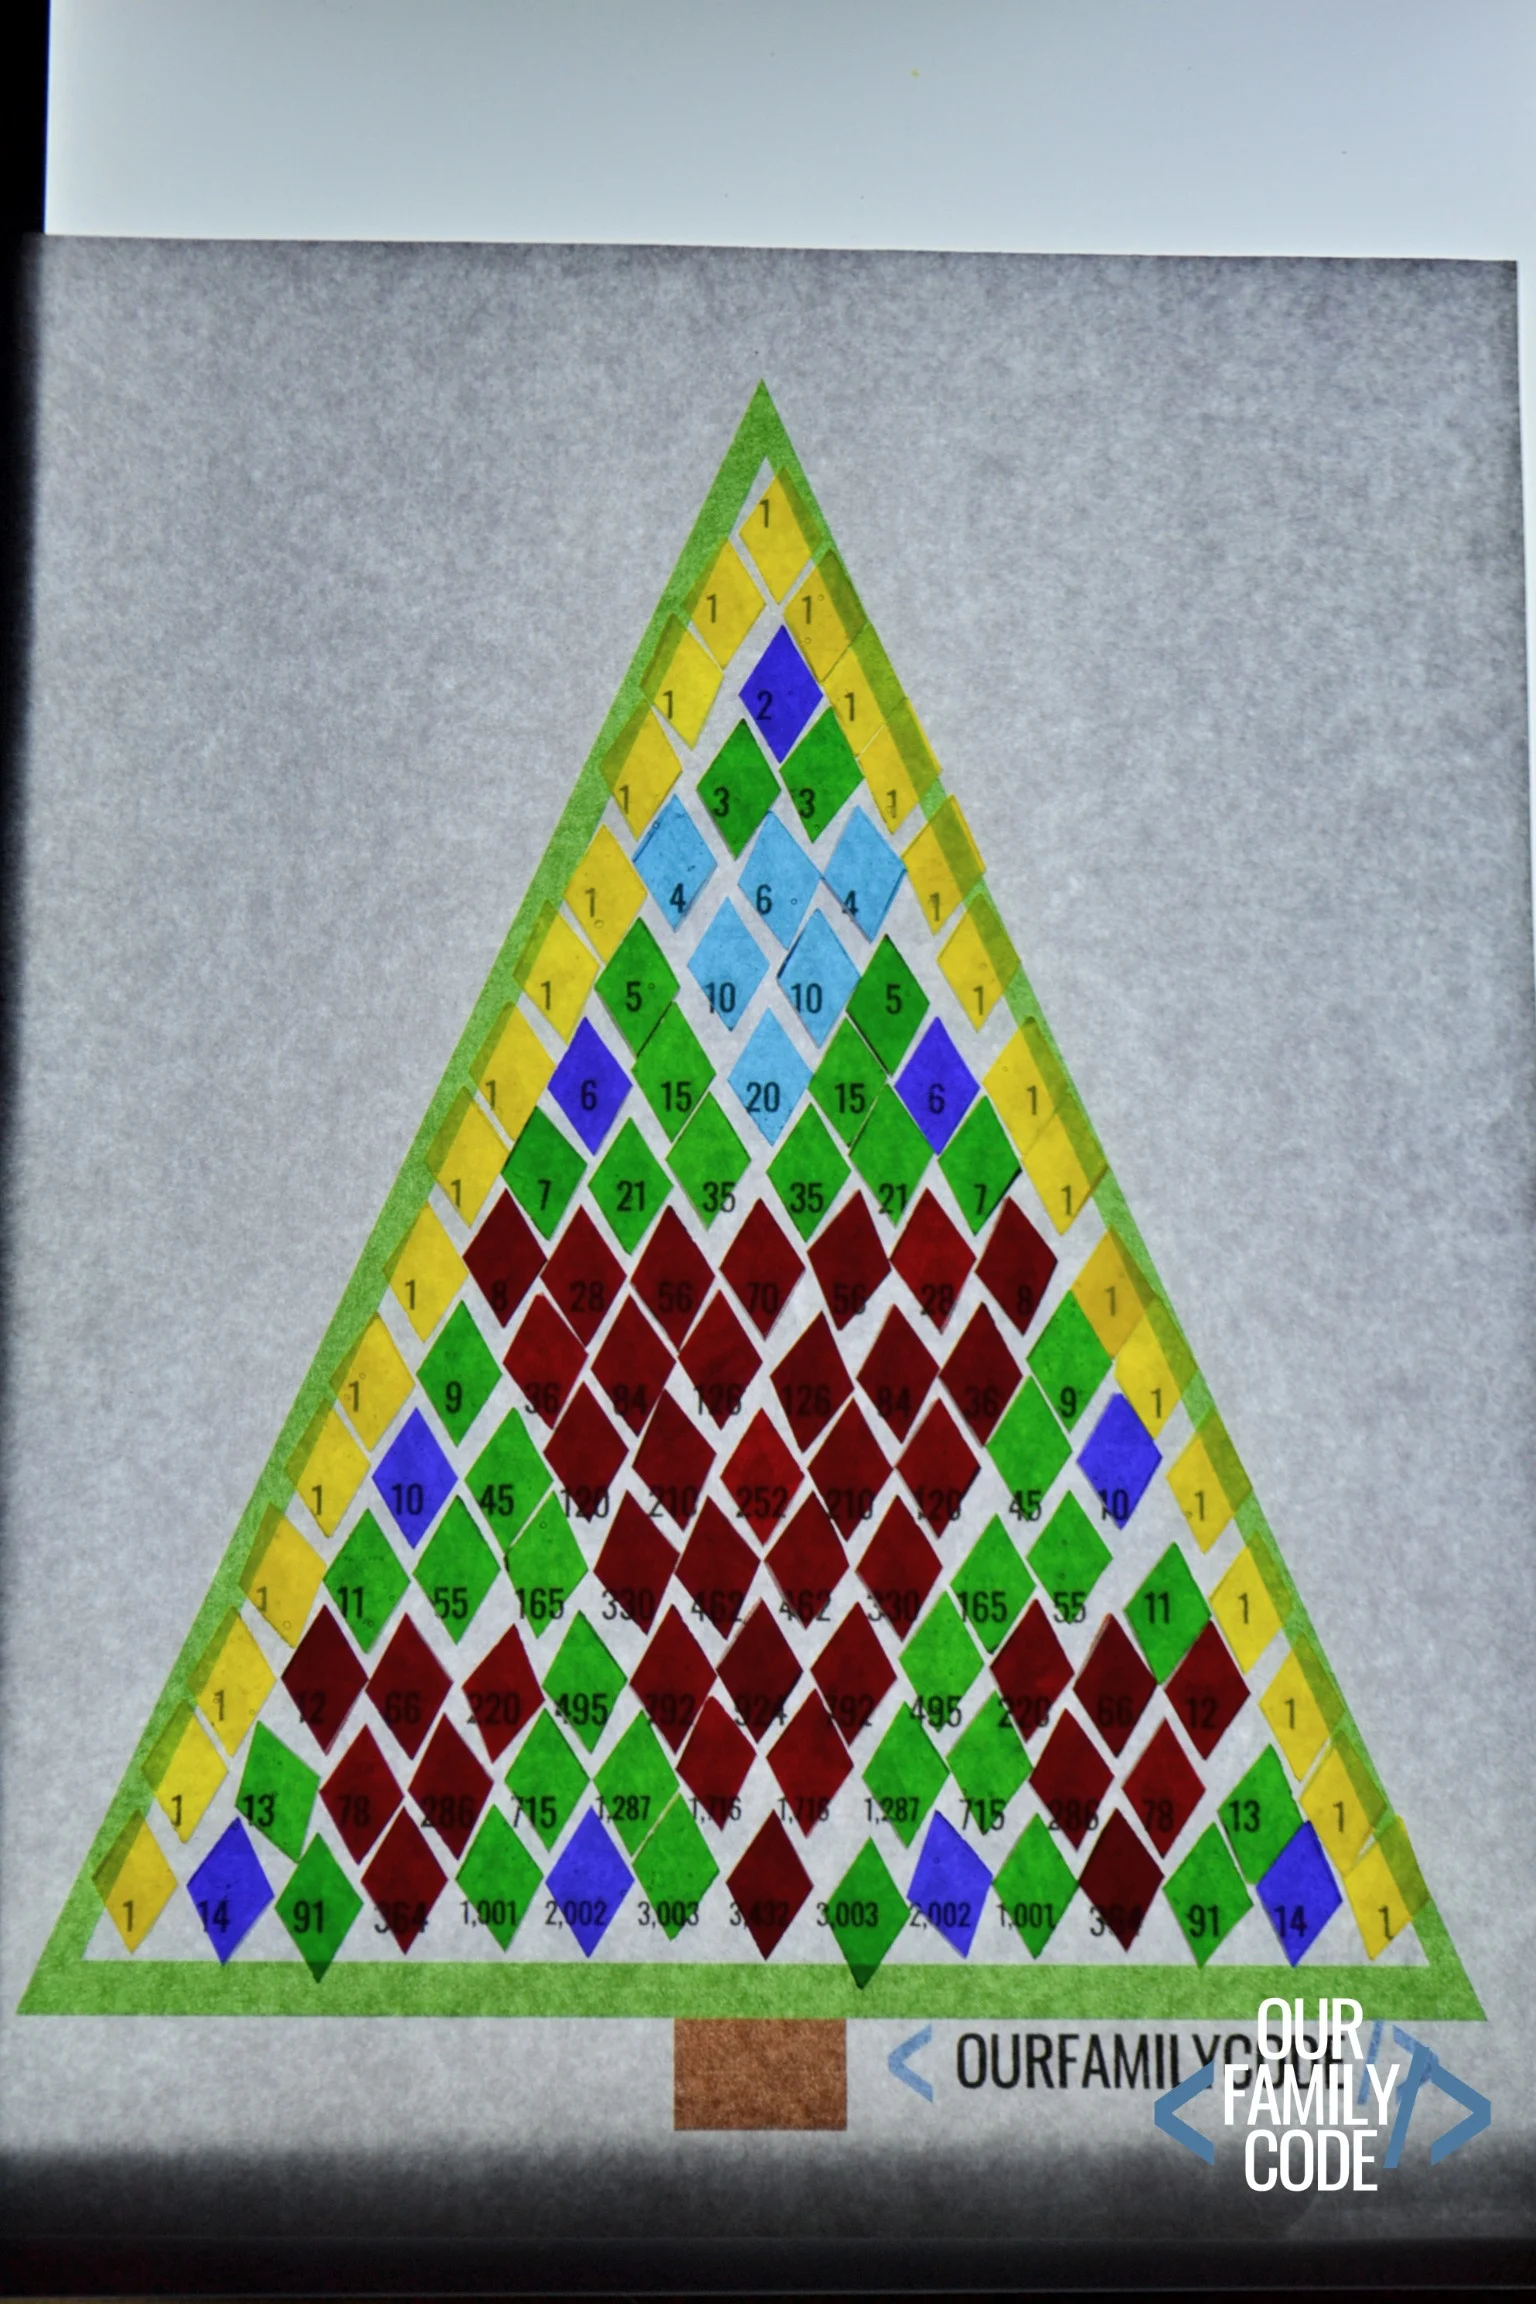 A picture of pascal triangle mosaic glass tile art activity.